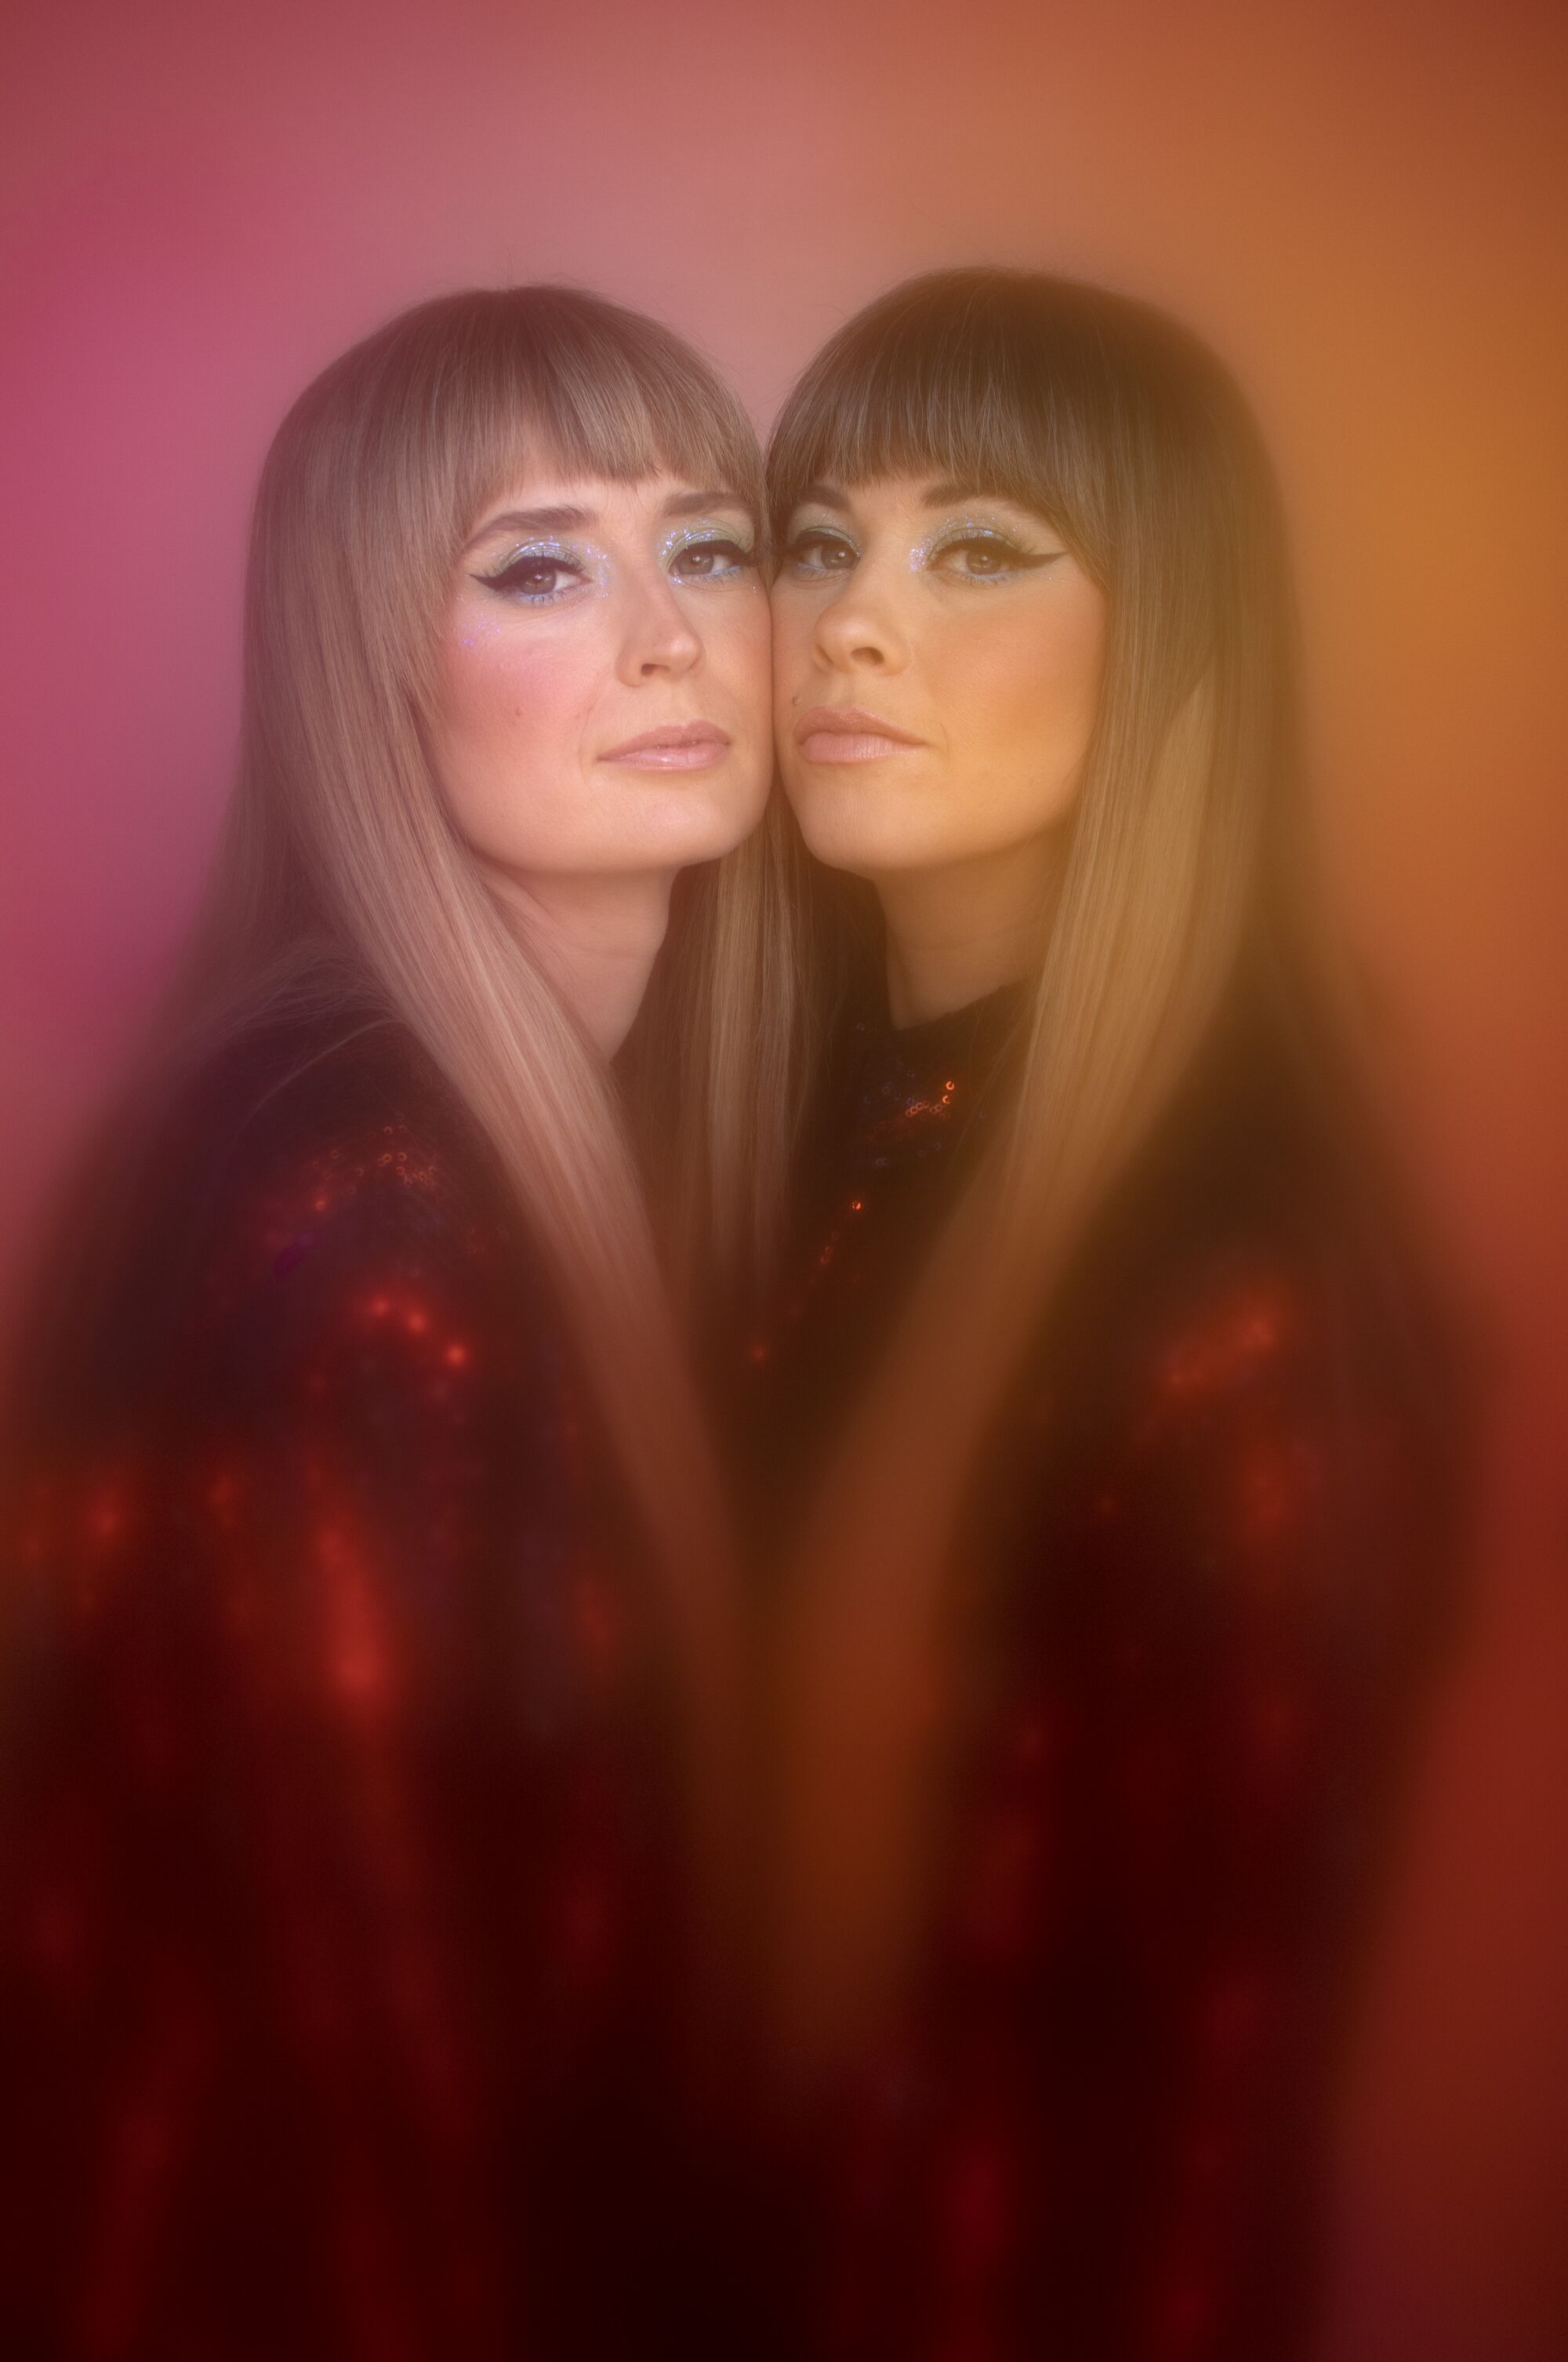 Holly Laessig and Jess Wolfe are the indie-rock duo "Lucius." Photographed on Tuesday, March 1, 2022 in Los Angeles, CA.